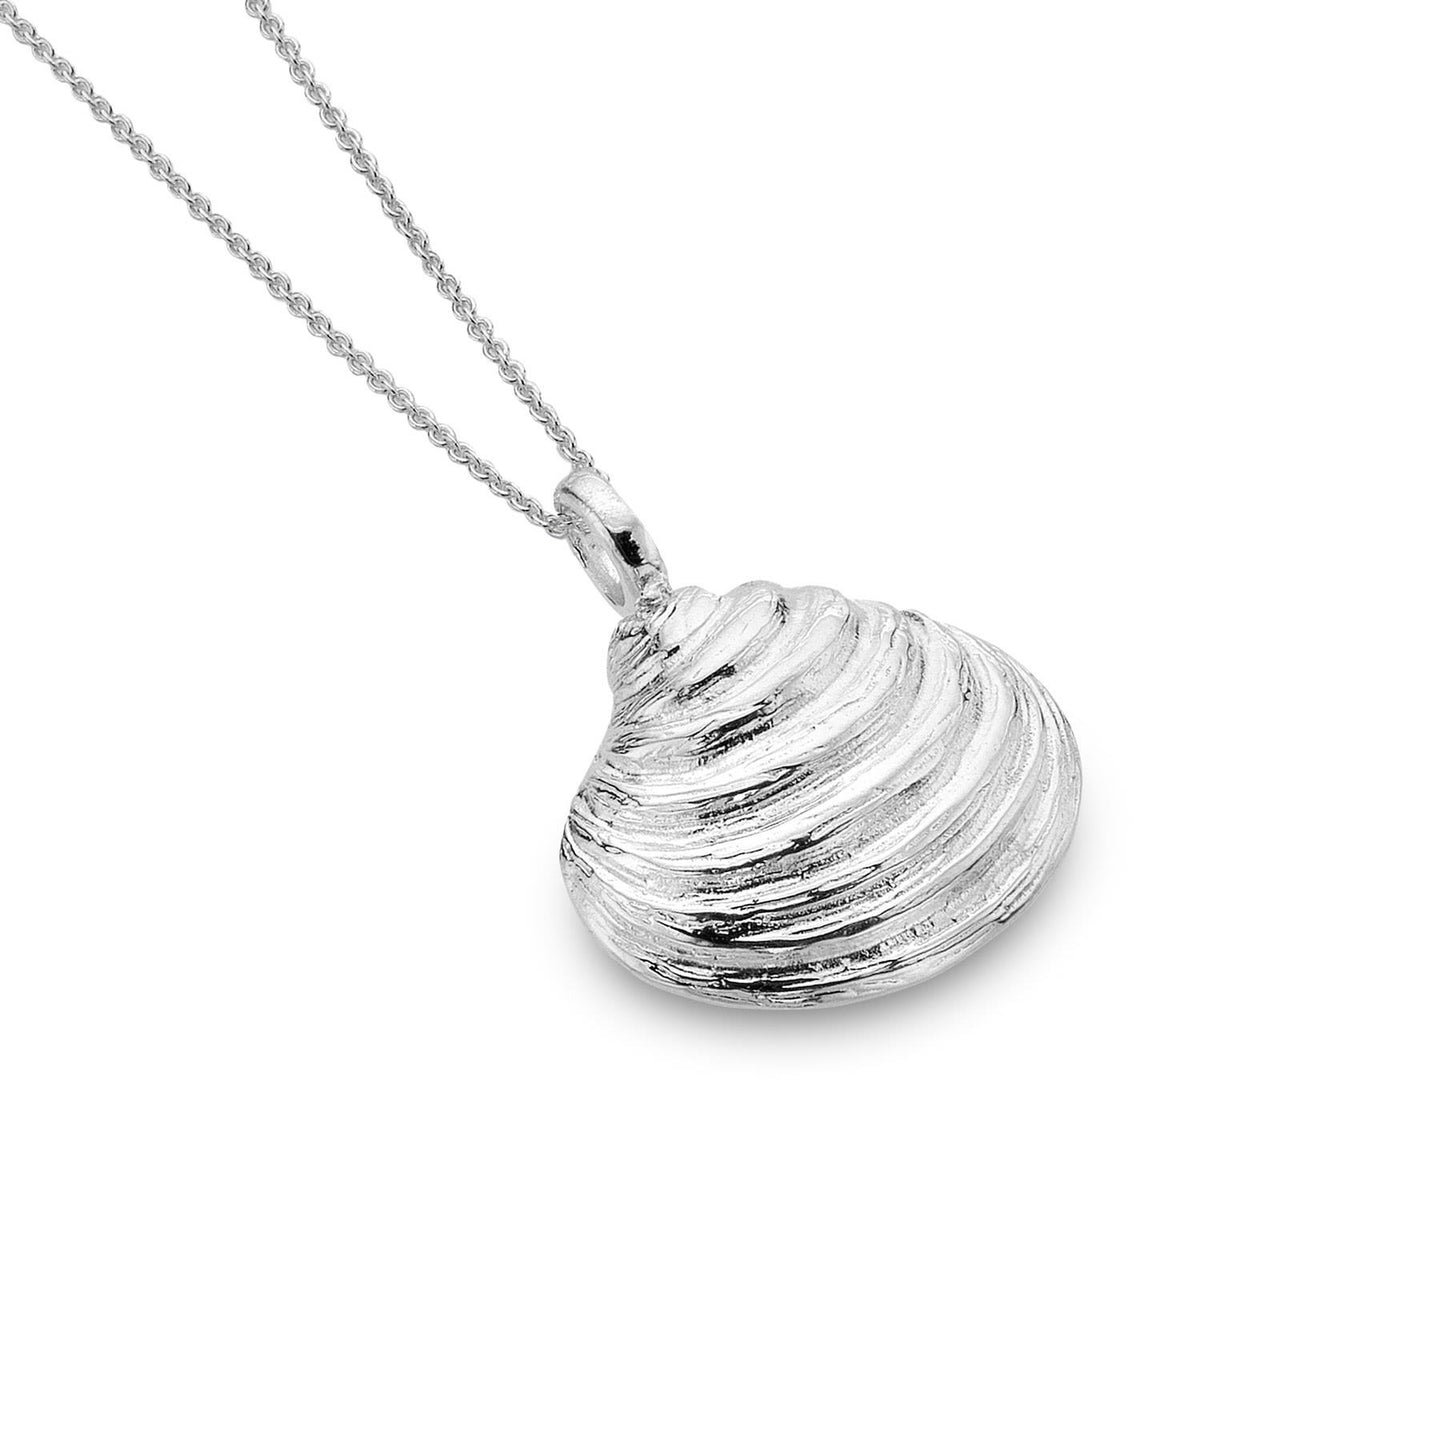 Sterling Silver Baby Clam Shell Pendant and Chain